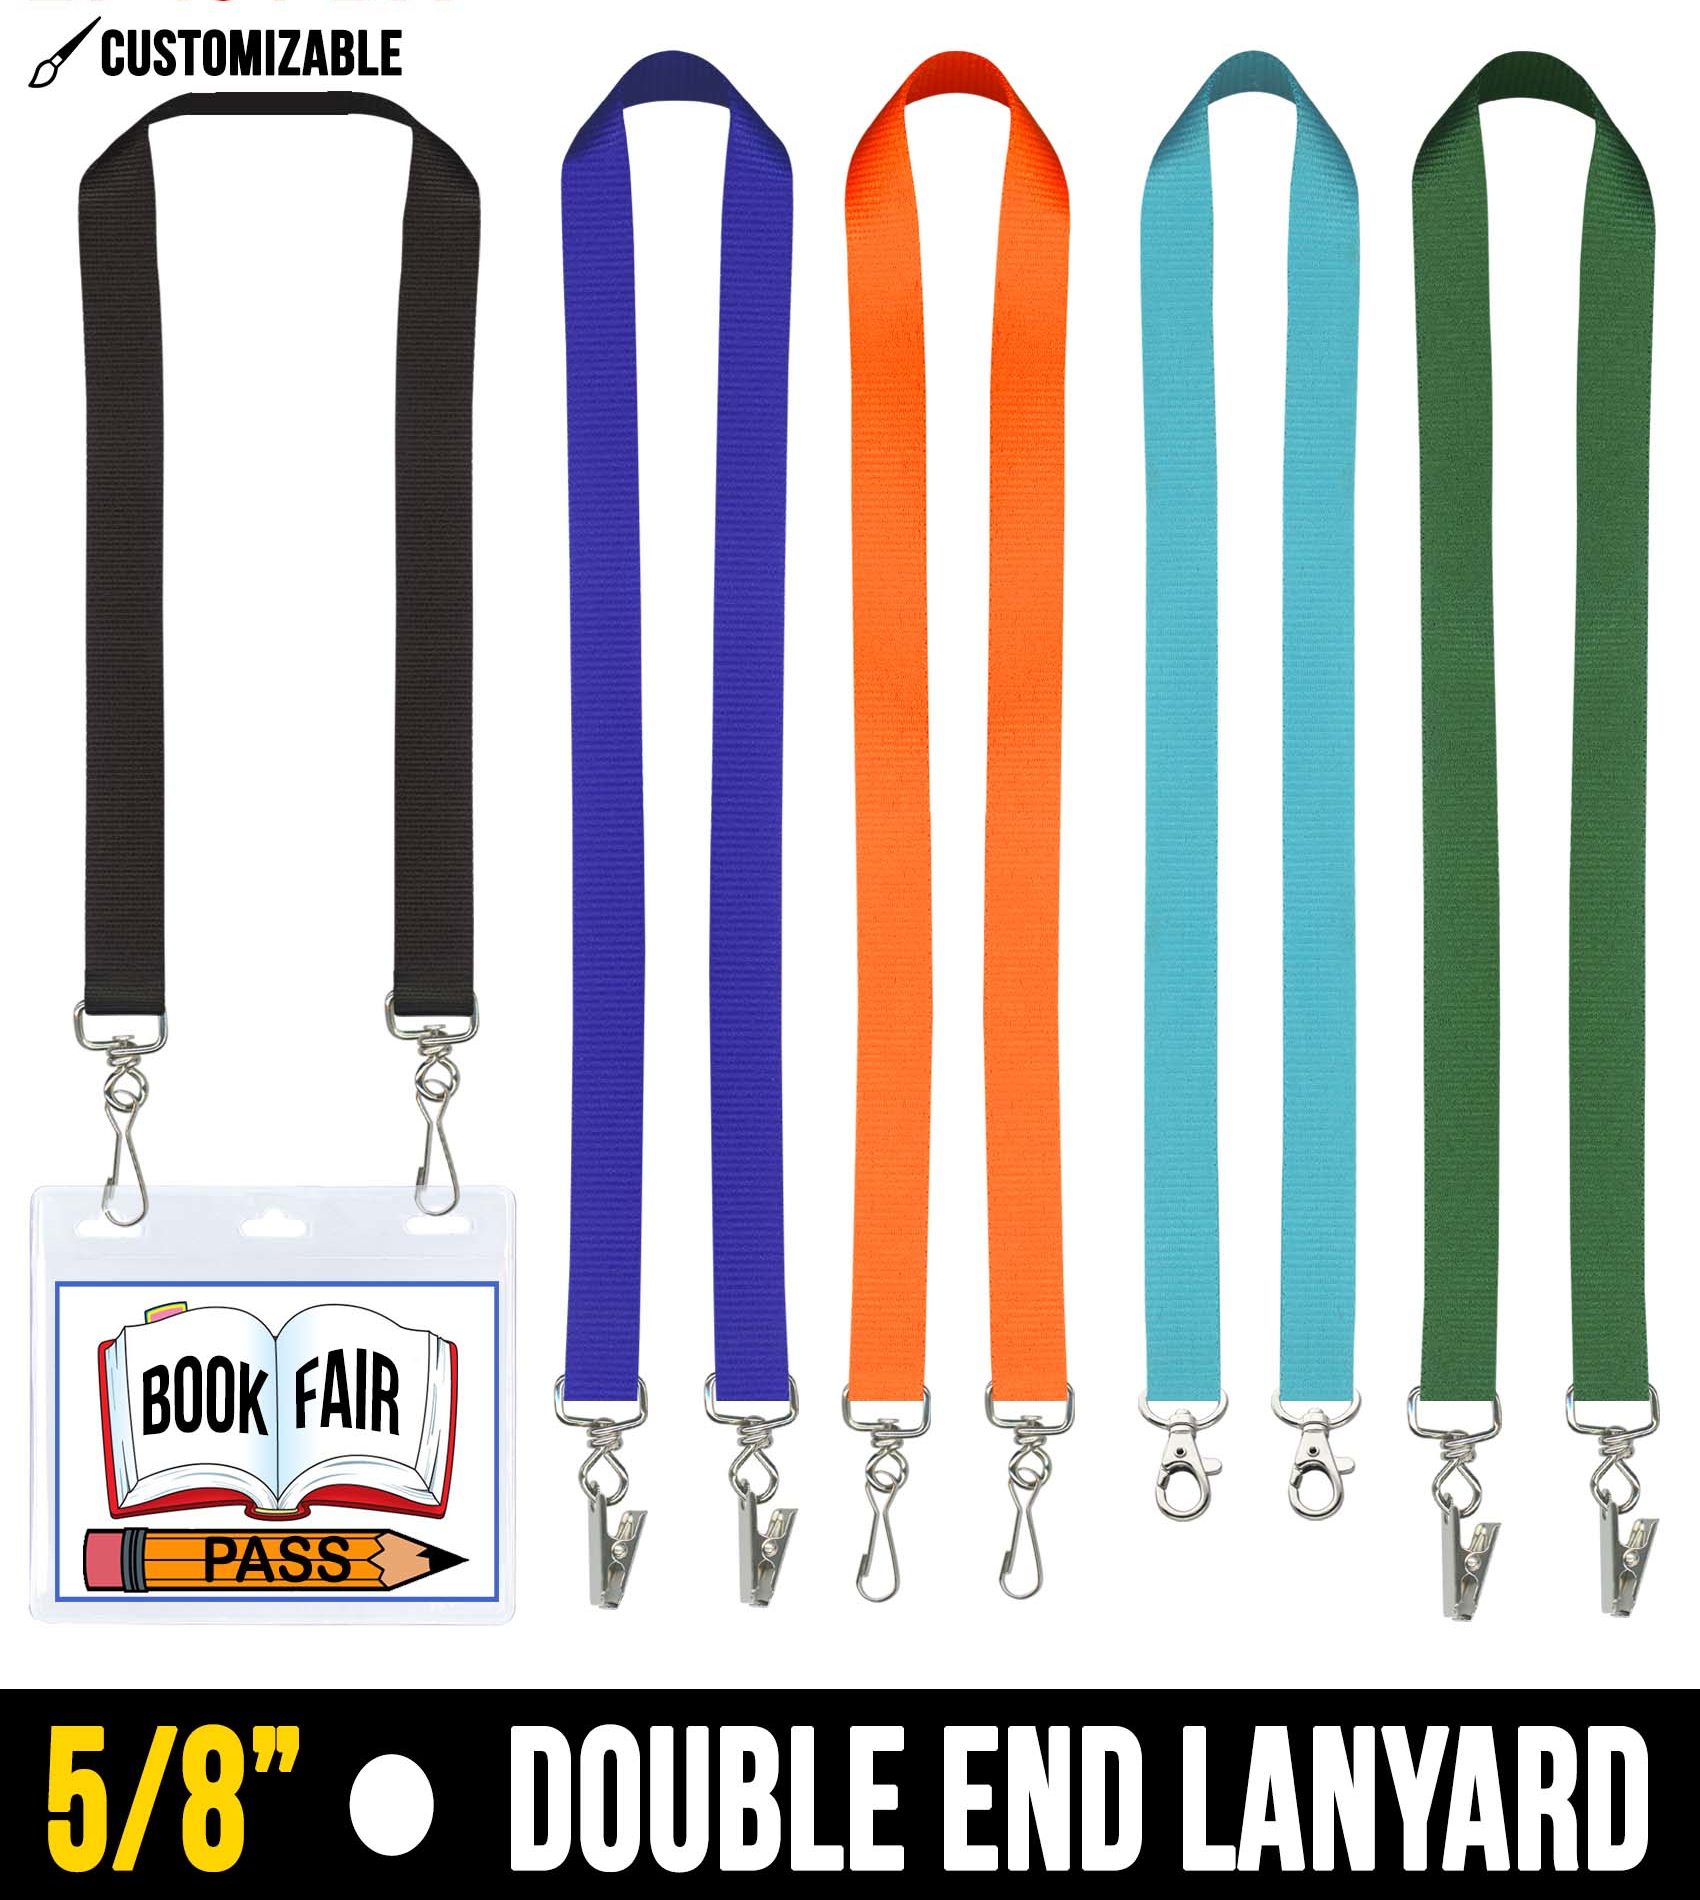 Customizable 5/8" Double Attachment Lanyard: Perfect for Badge Holders in 14 Vibrant Colors